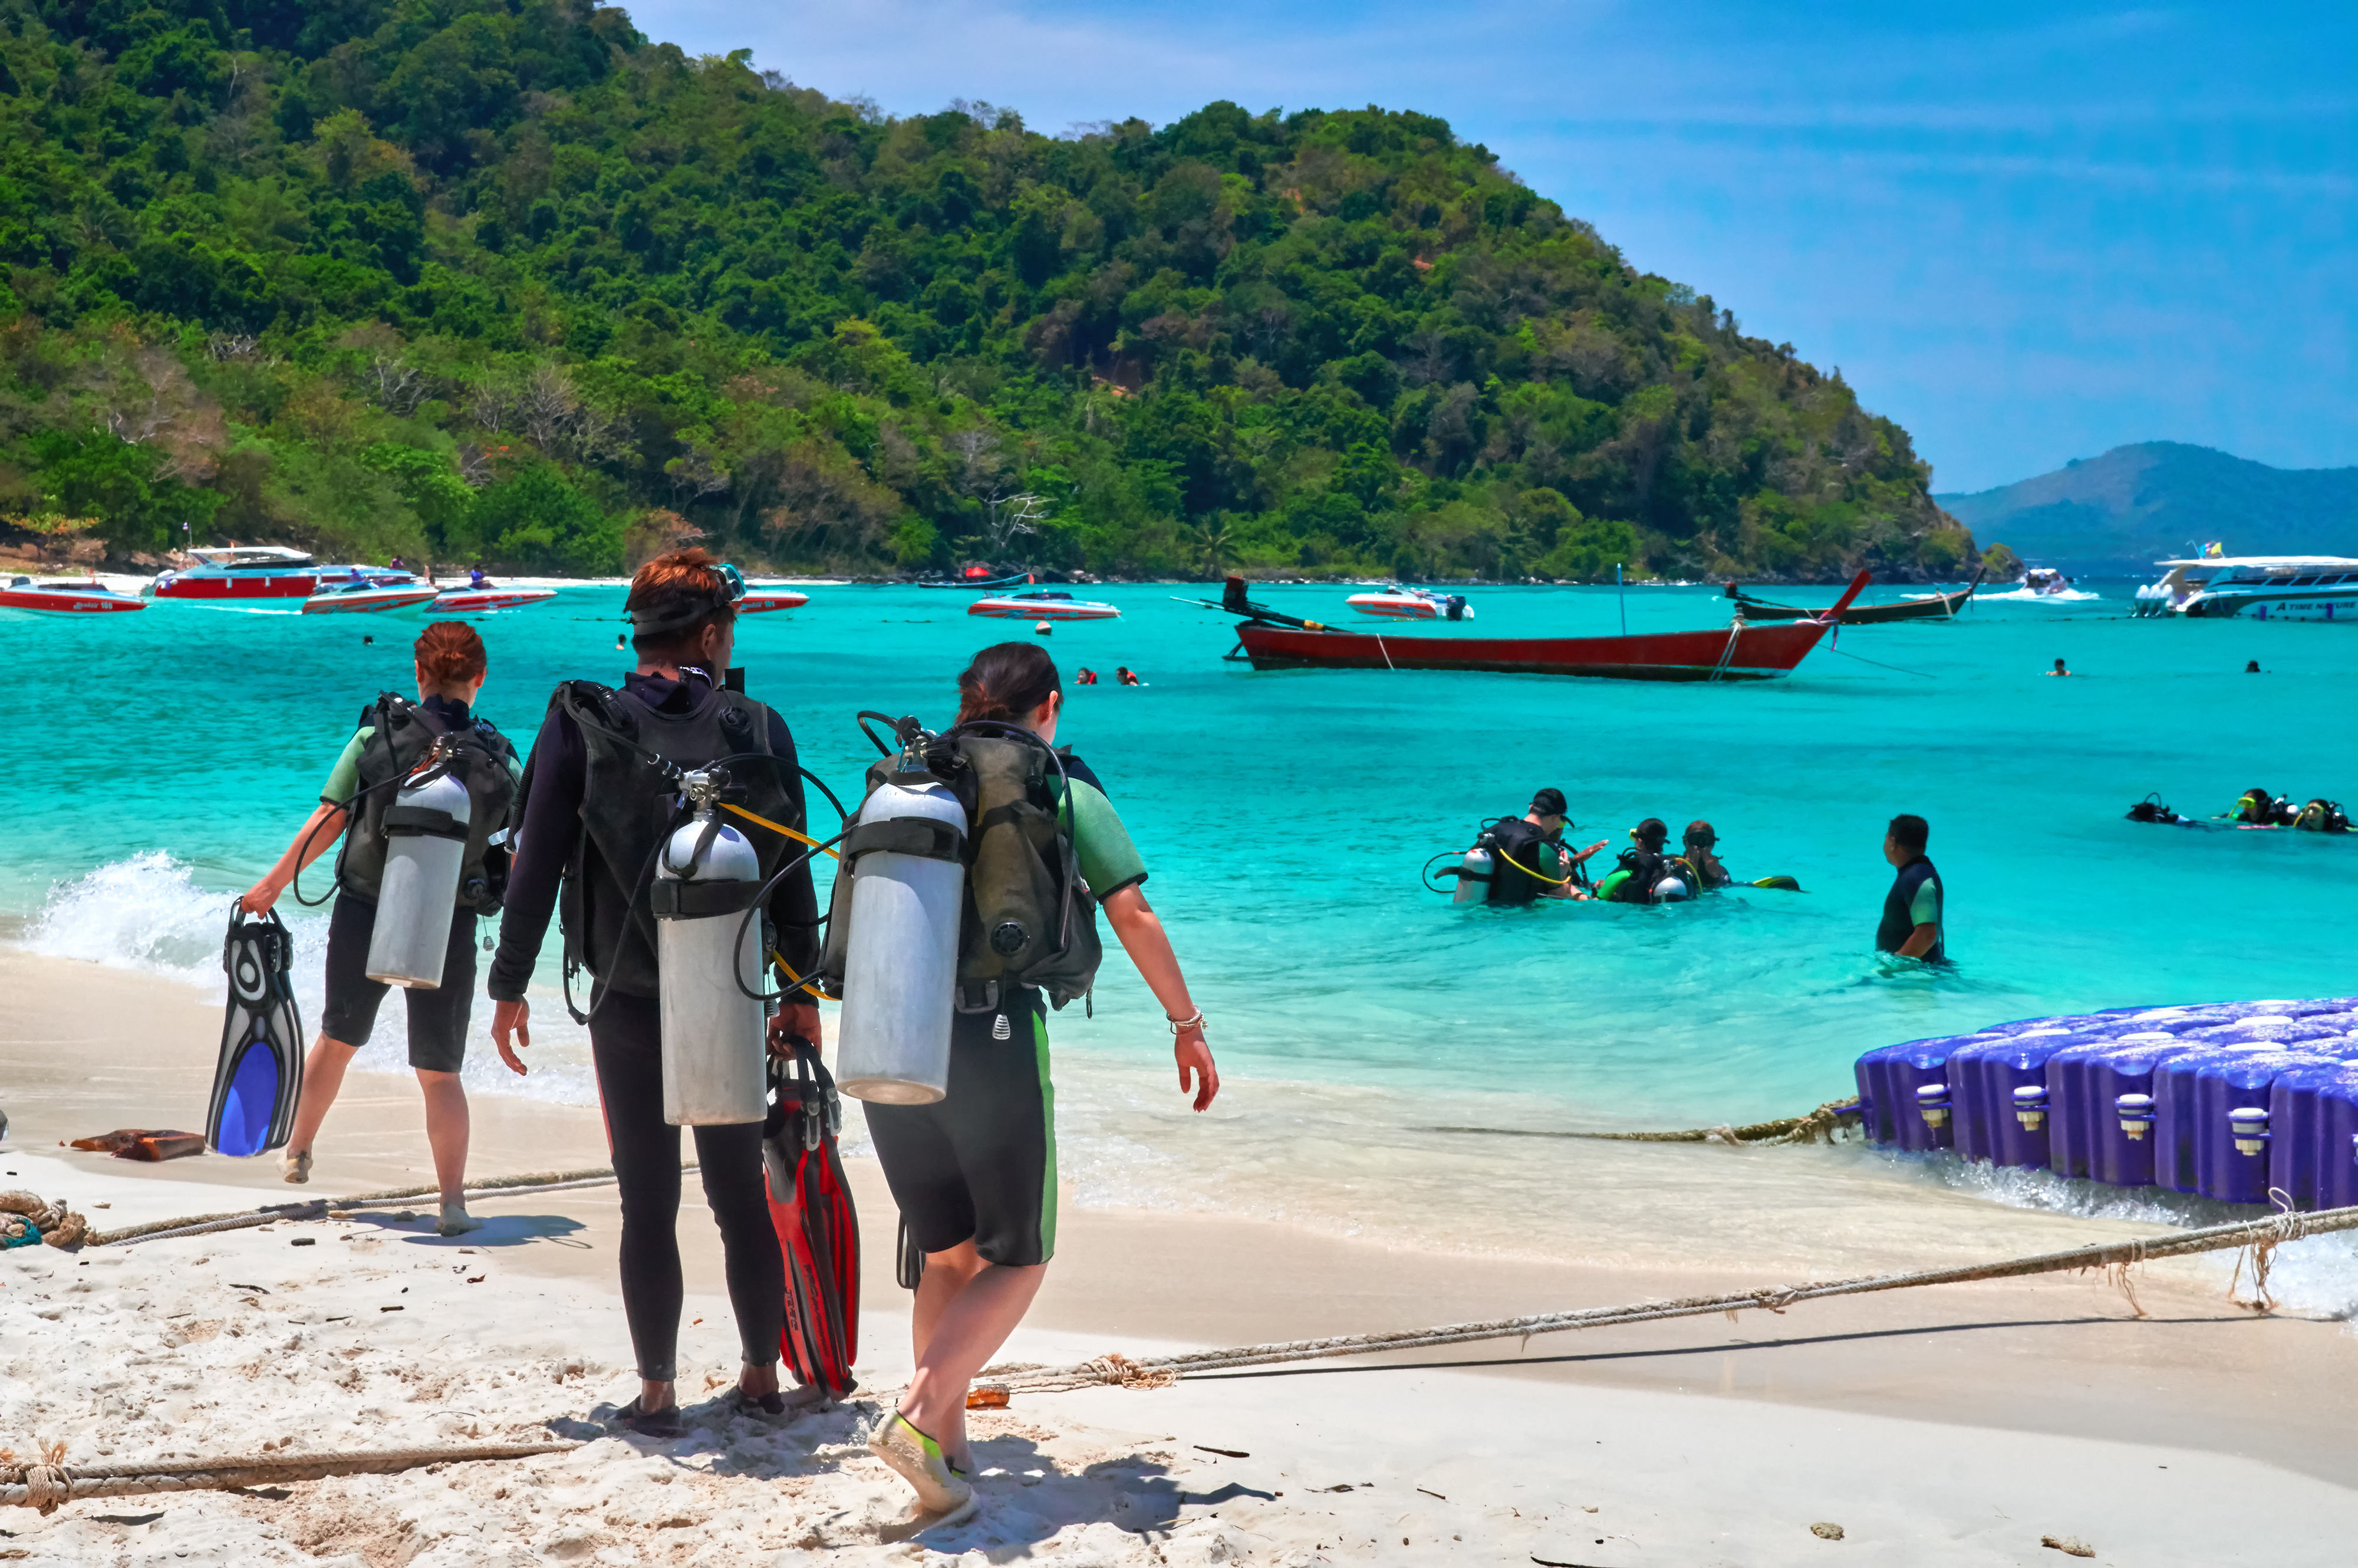 Scuba divers on white sand beach walking towards turquoise bay with divers learning to dive in shallow water.